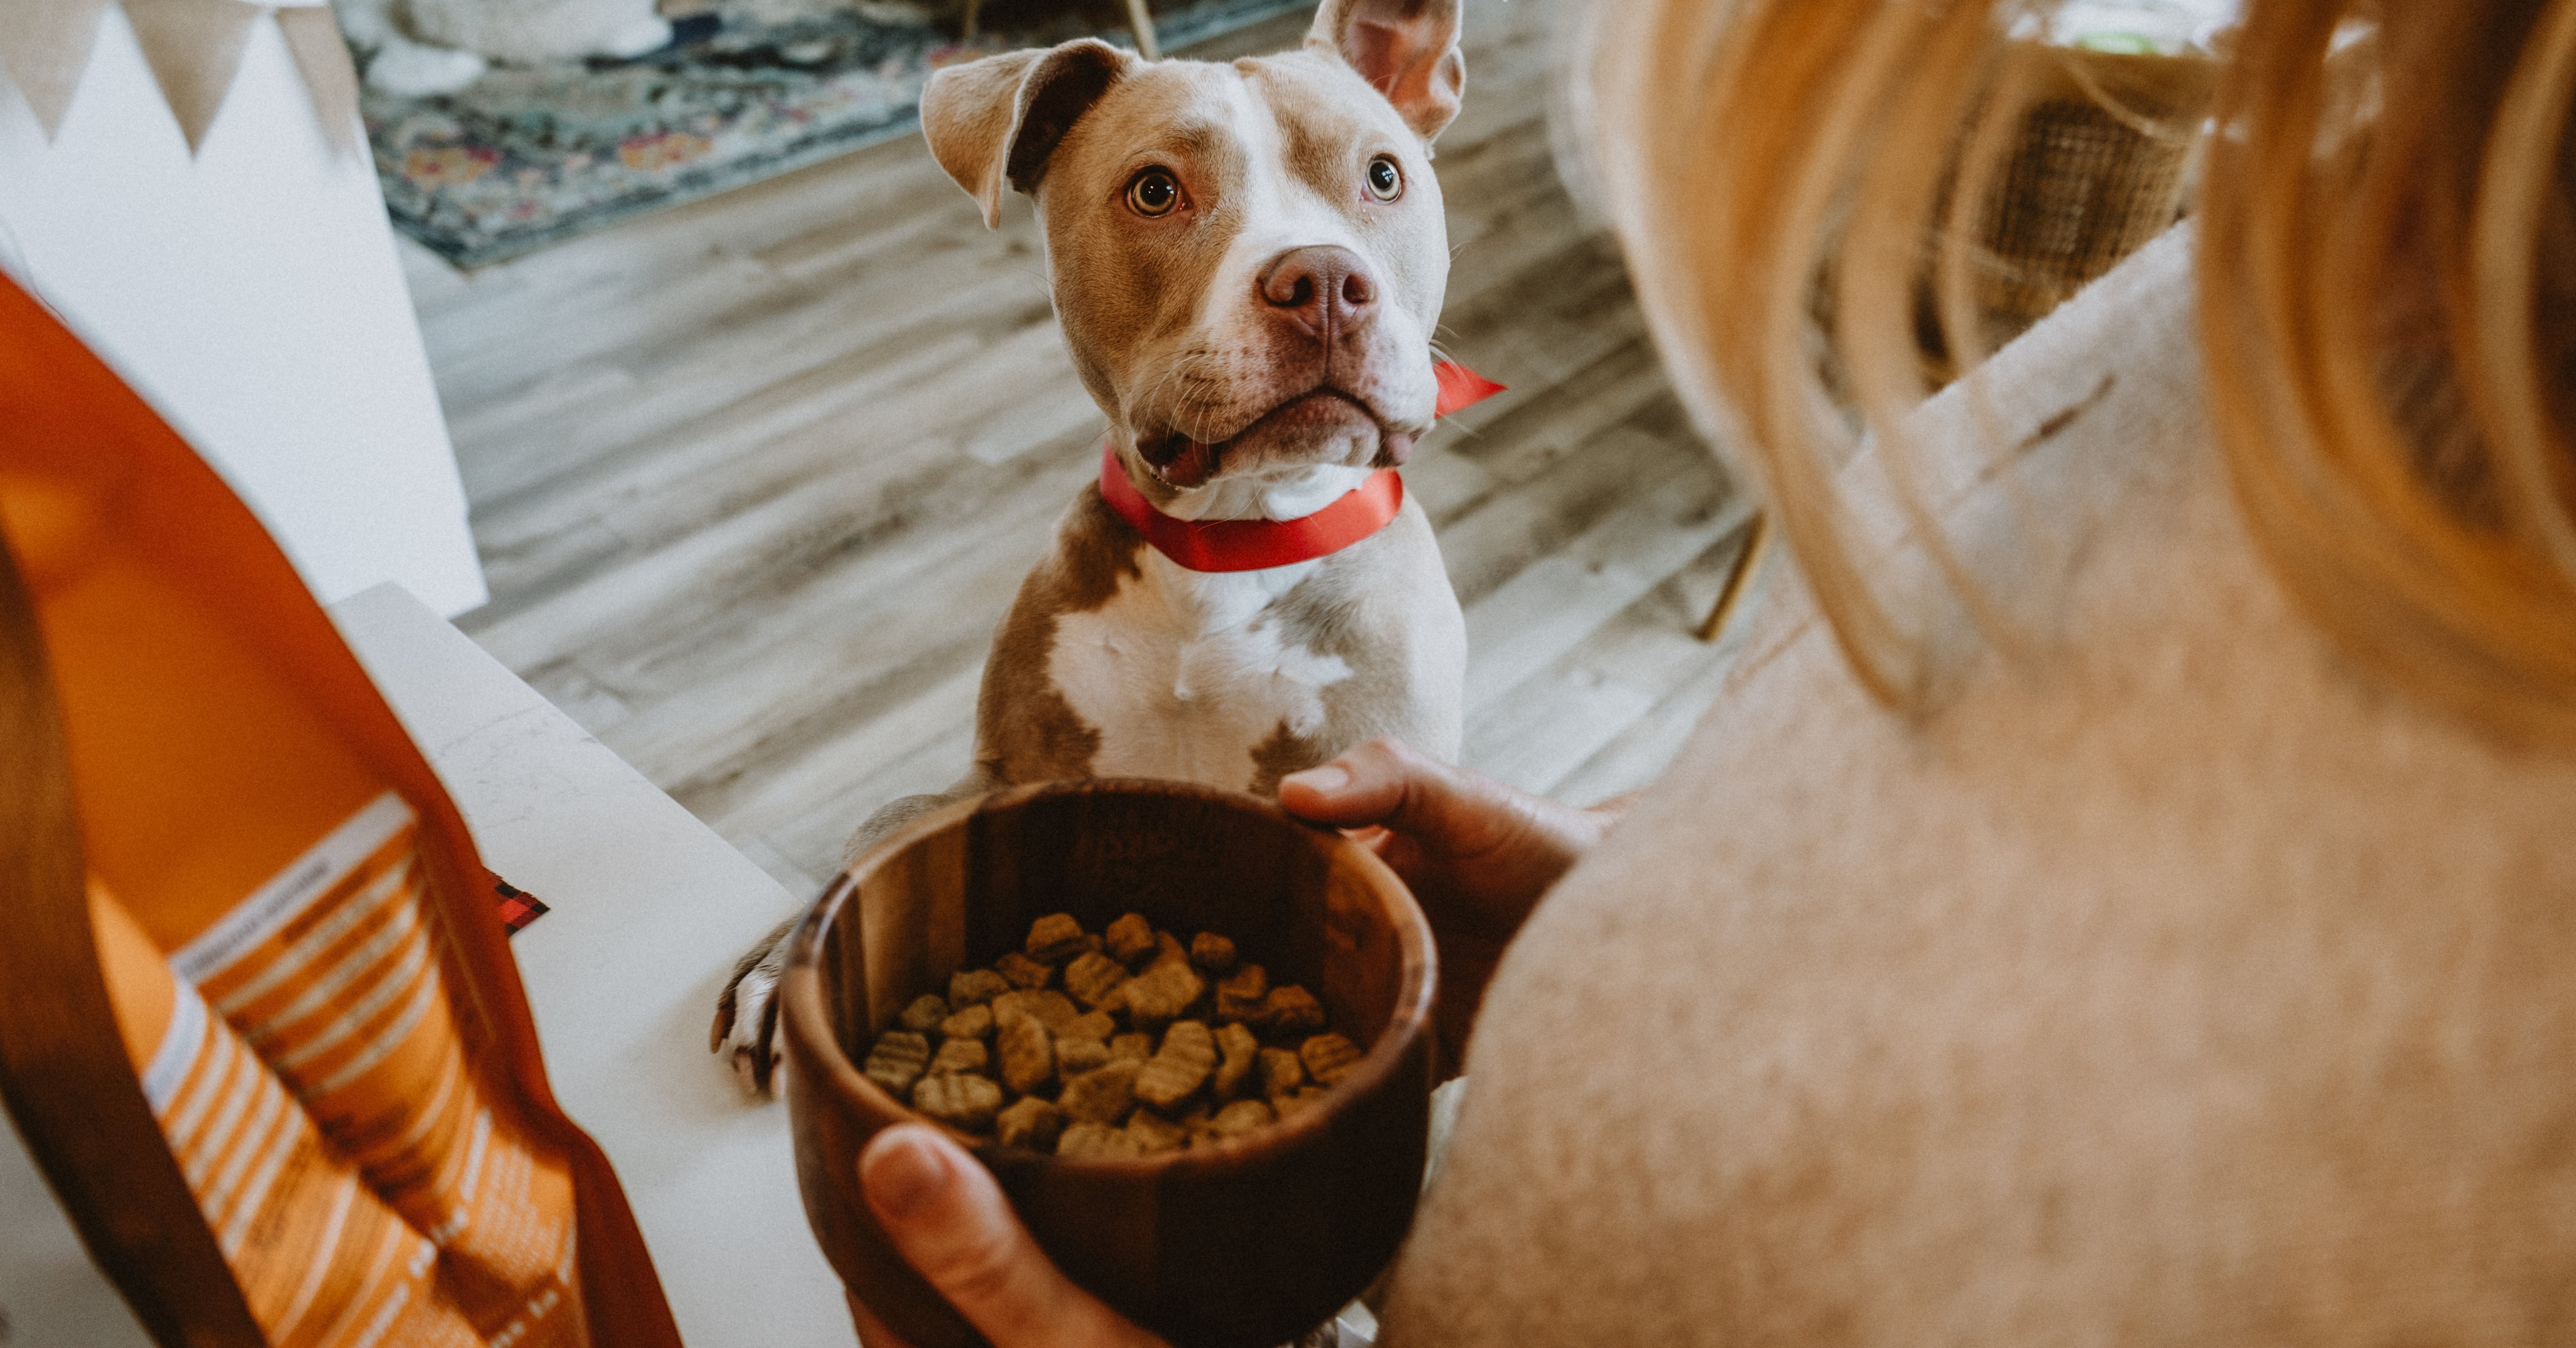 A happy dog looking up at his owner with a bowl of food in front of him. On the left is a food storage bag, highlighting the importance of proper storage for safe and healthy pet food